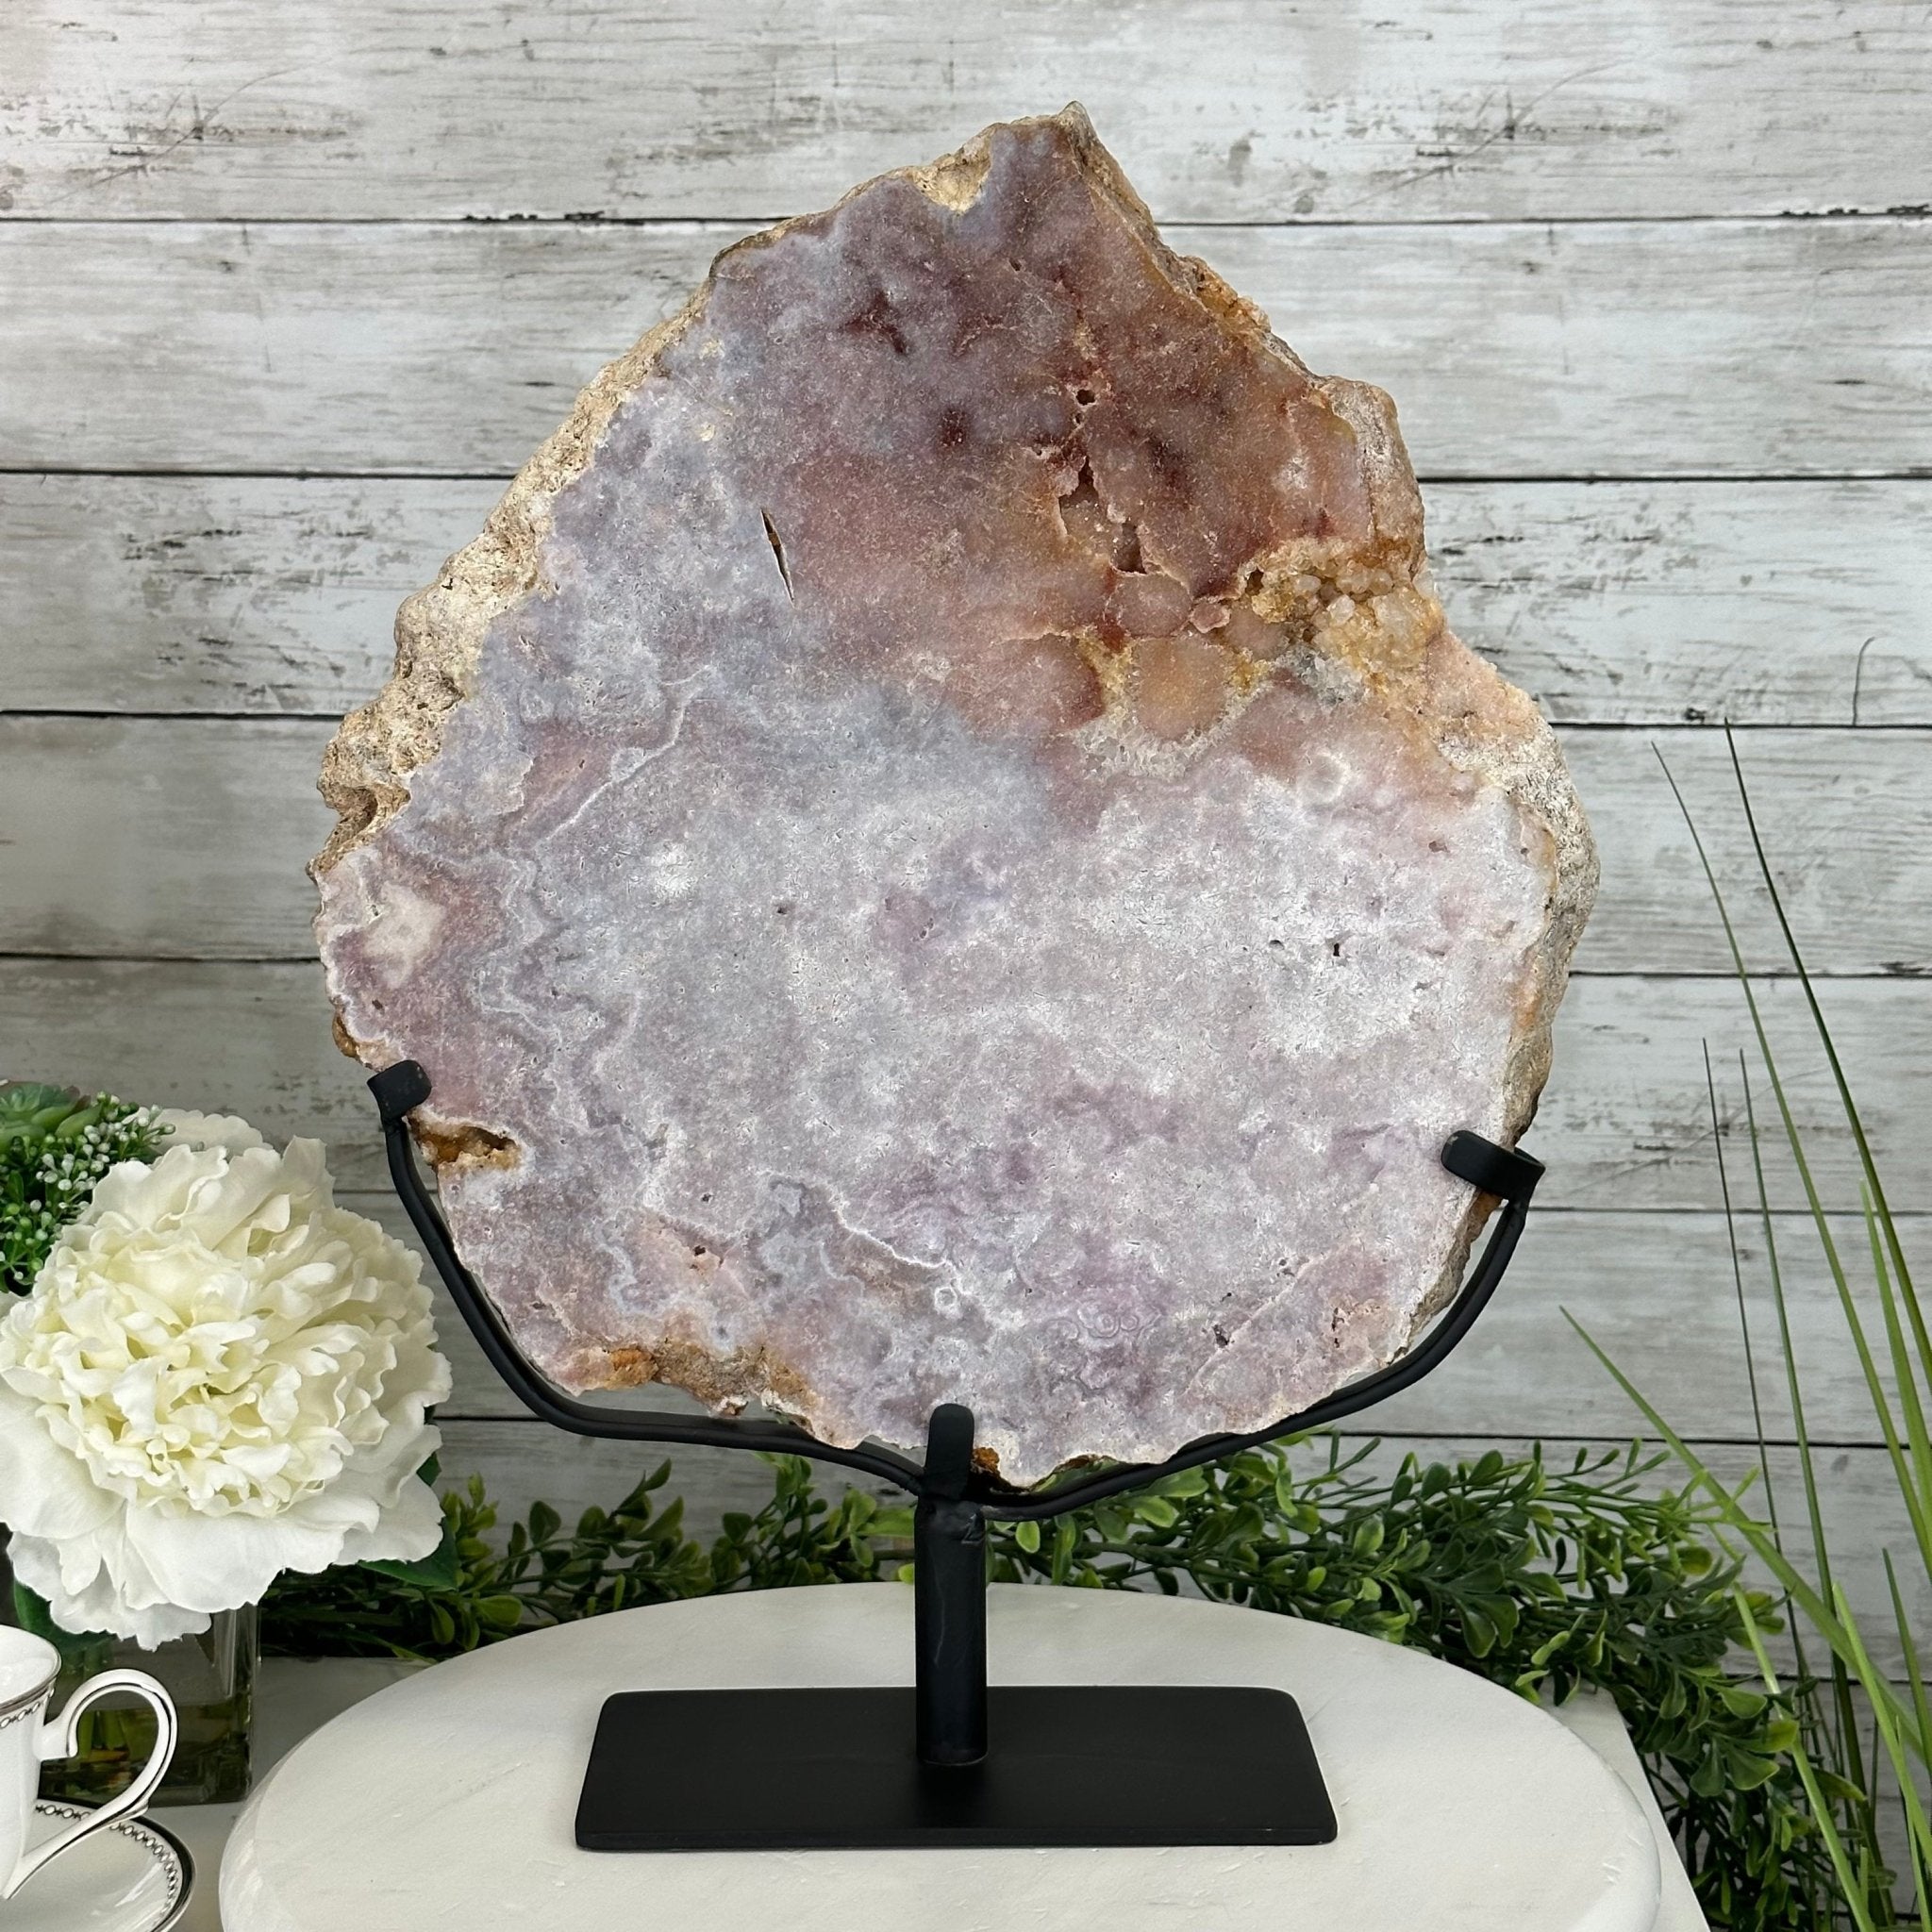 Polished Pink Amethyst Slice on a Stand, 11.4 lbs, 17.5" Tall #5743-0009 by Brazil Gems - Brazil GemsBrazil GemsPolished Pink Amethyst Slice on a Stand, 11.4 lbs, 17.5" Tall #5743-0009 by Brazil GemsSlices on Fixed Bases5743-0009